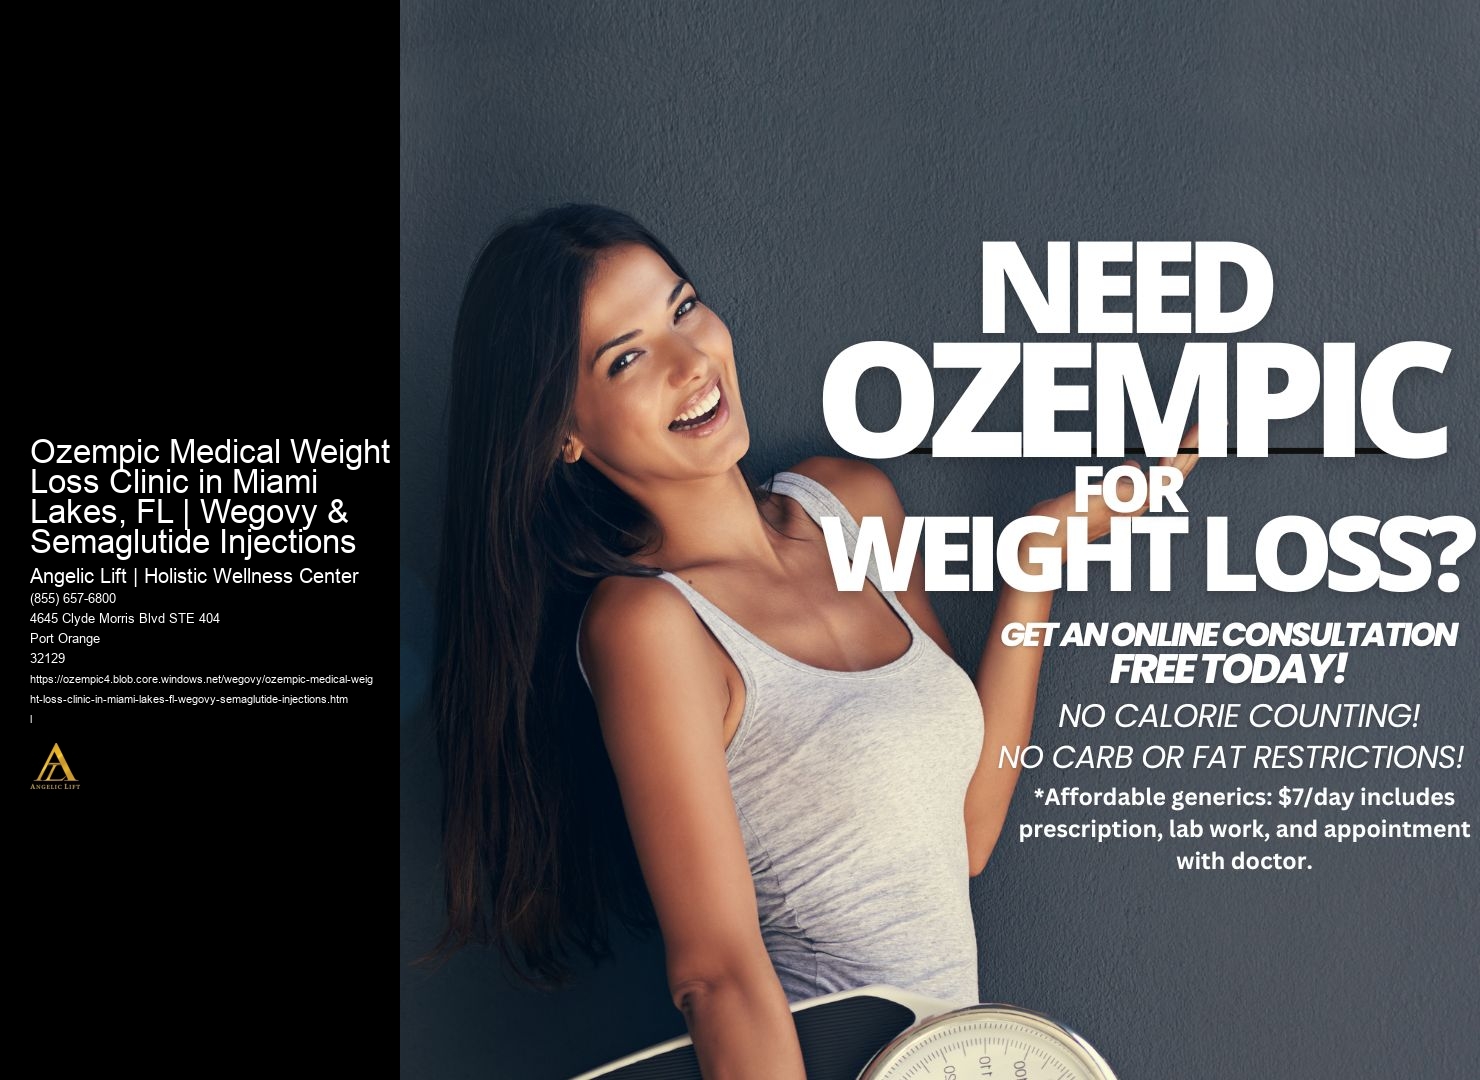 Ozempic Medical Weight Loss Clinic in Miami Lakes, FL | Wegovy & Semaglutide Injections